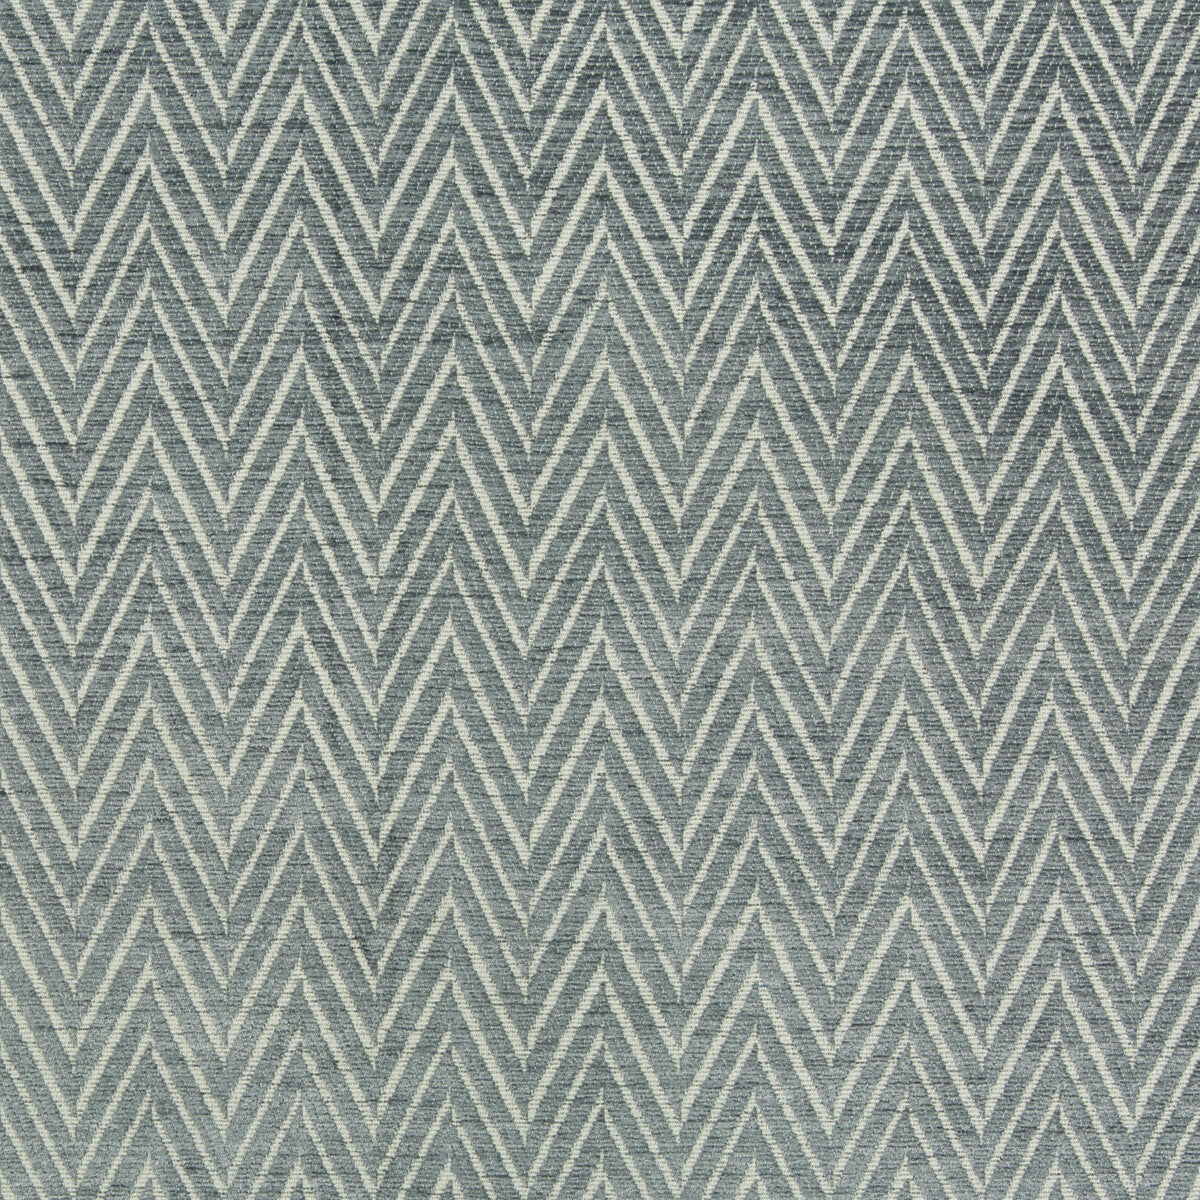 Kravet Contract fabric in 34743-11 color - pattern 34743.11.0 - by Kravet Contract in the Incase Crypton Gis collection